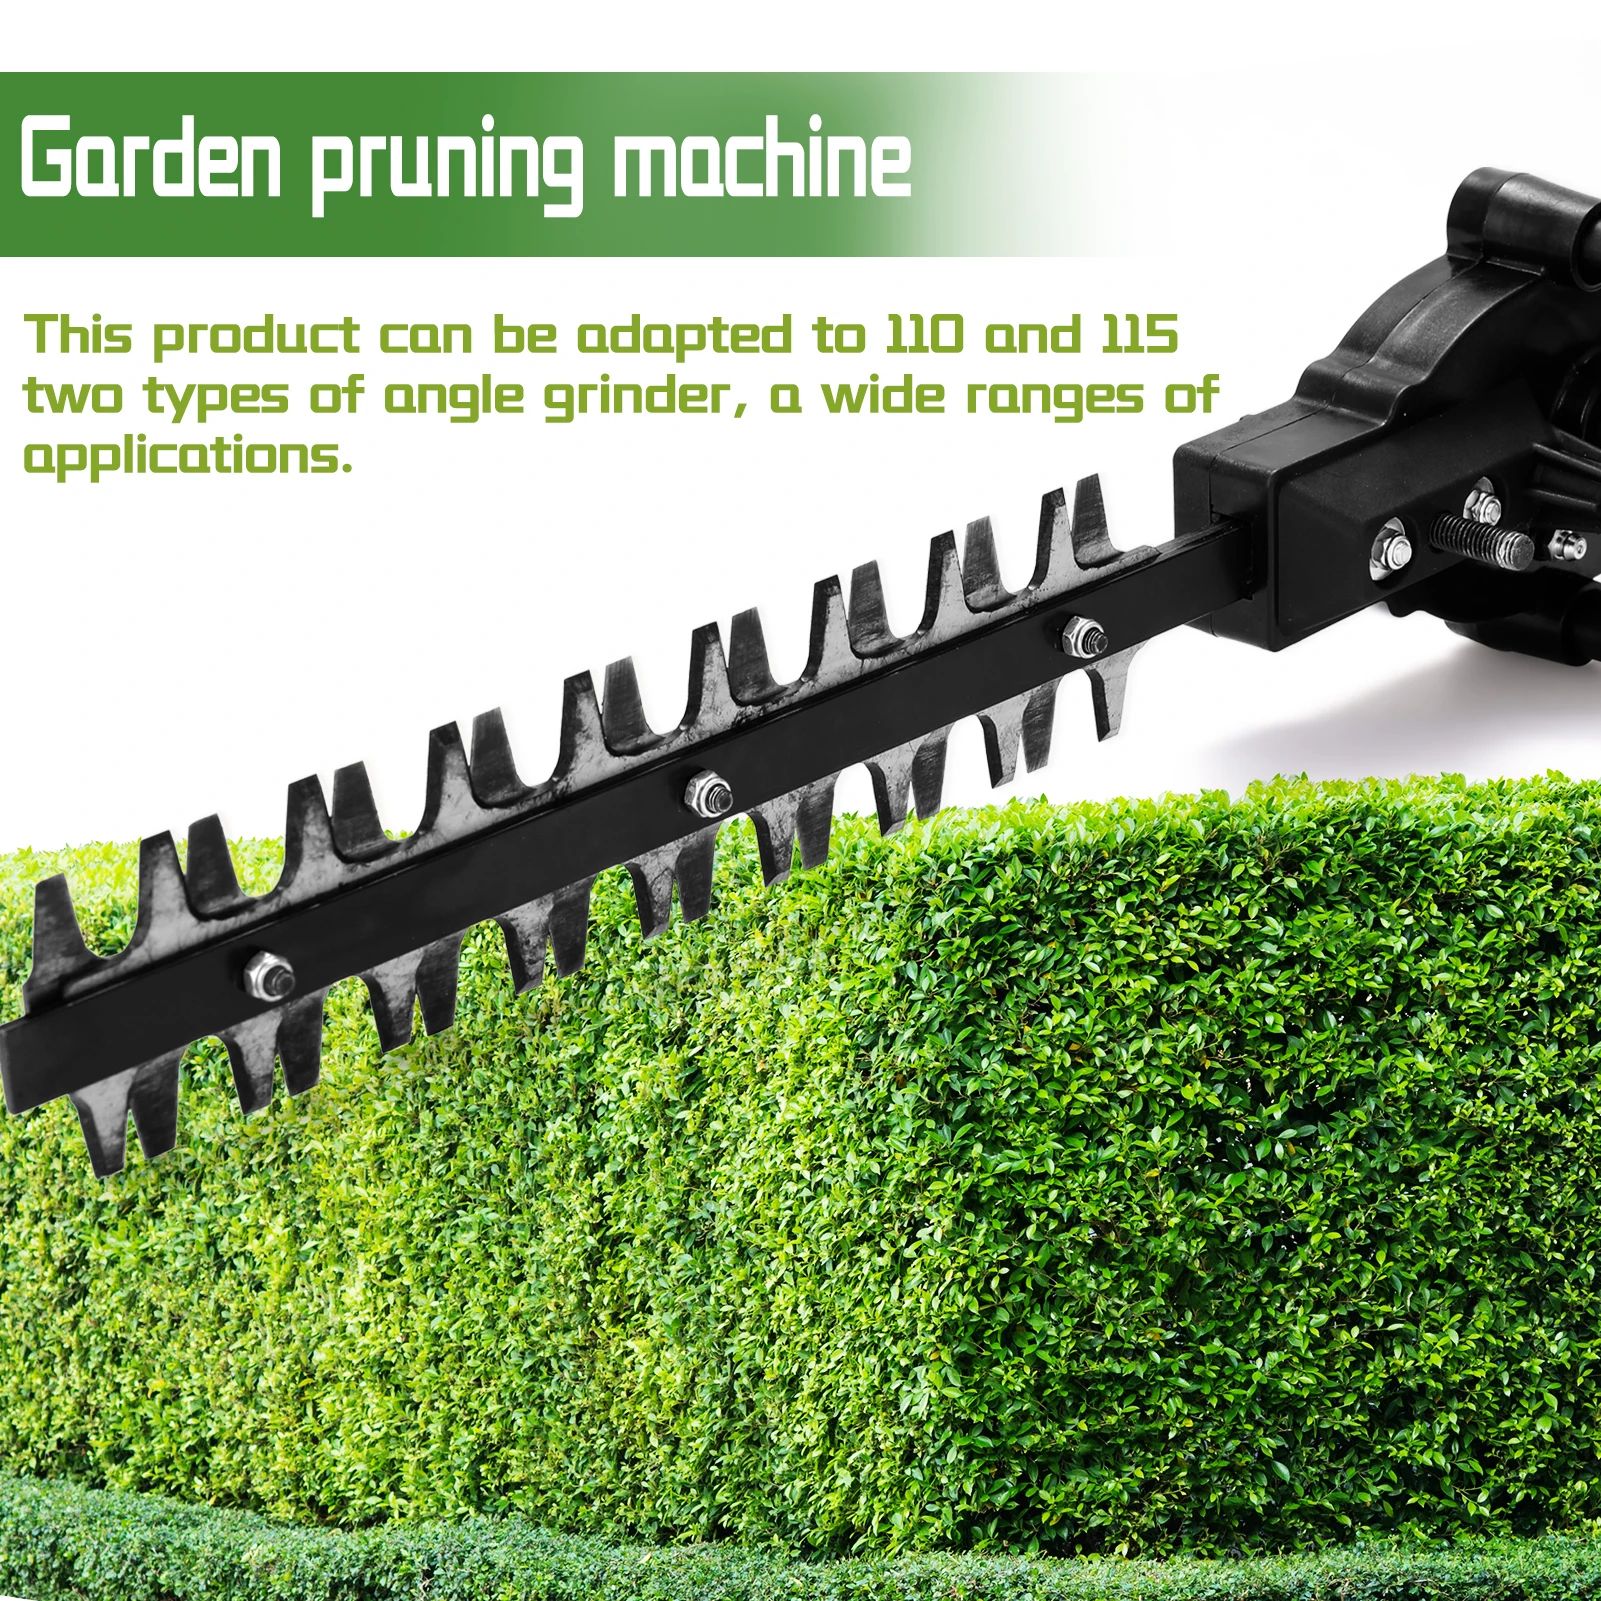 

Angle Grinder Refit Garden Pruning Machine Tool Hedge Trimmer Pruning Tools Garden Home Outdoor Modified Tool Accessory 110 115